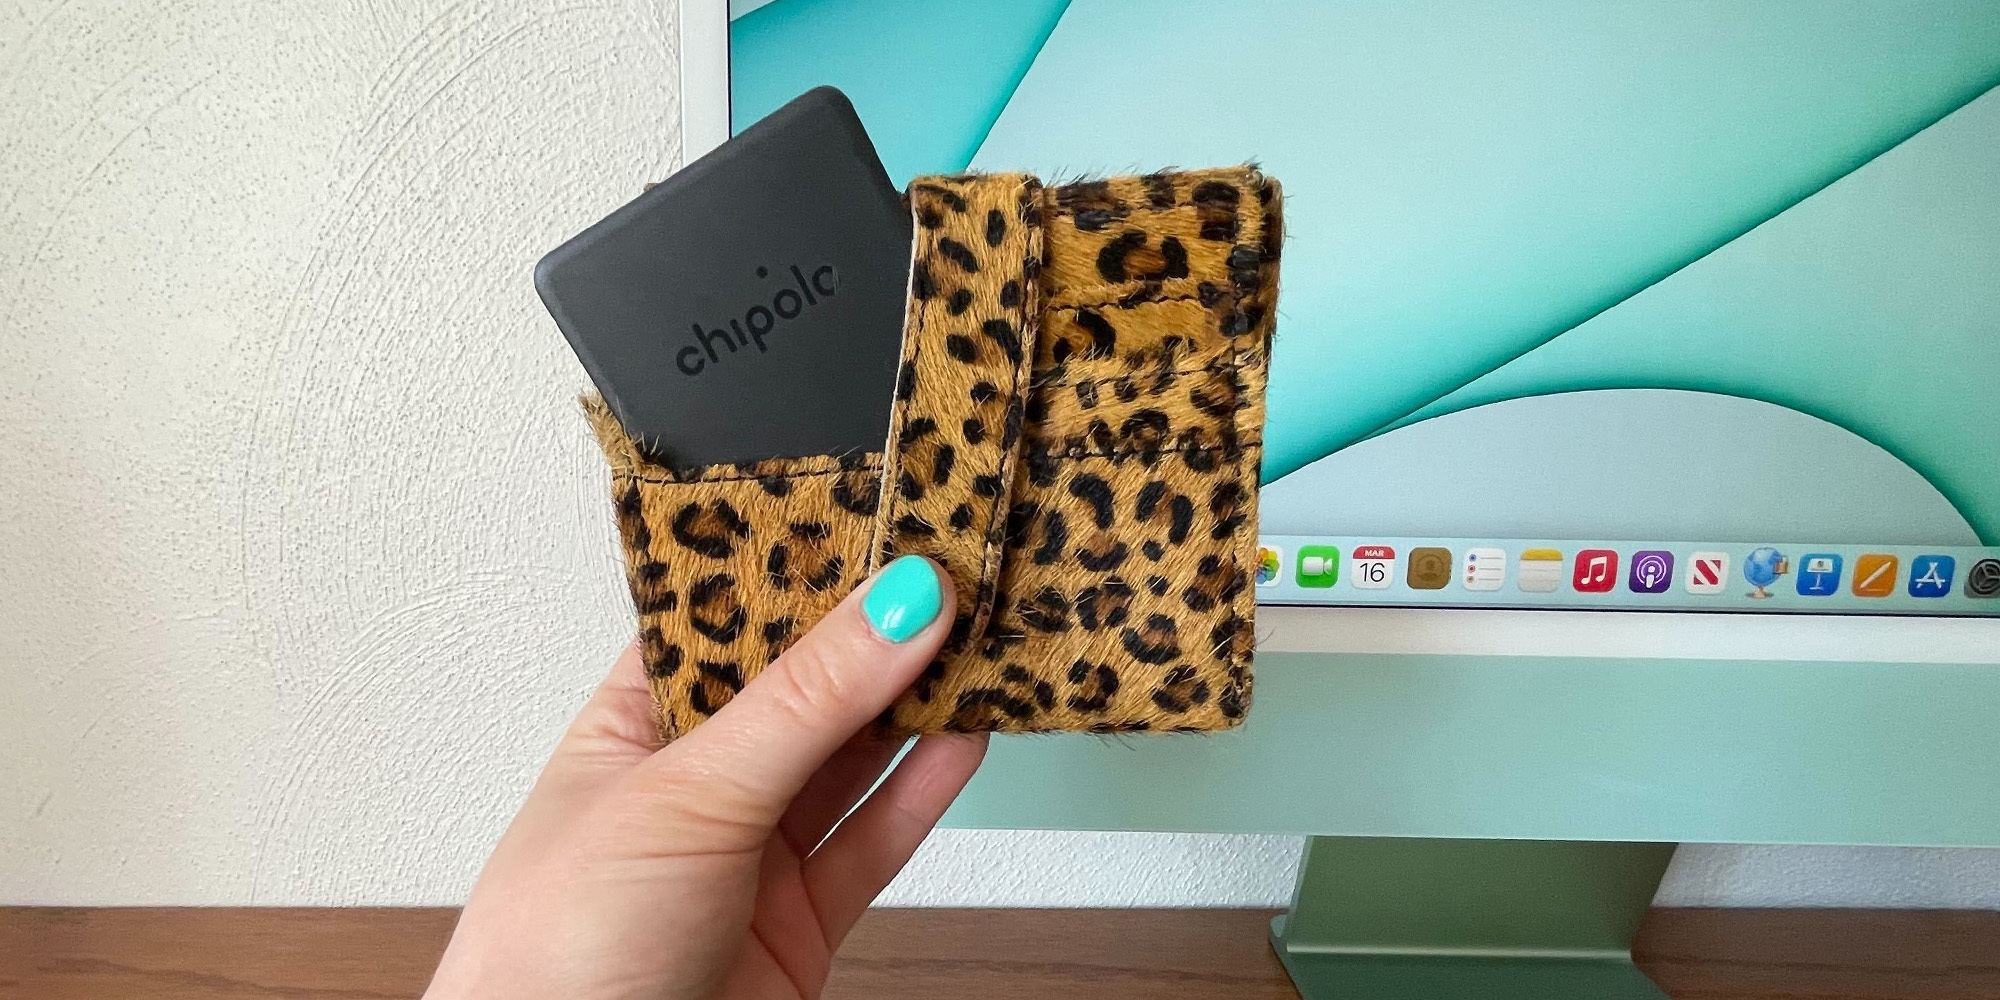 Chipolo ONE Spot review: the only real alternative to AirTag